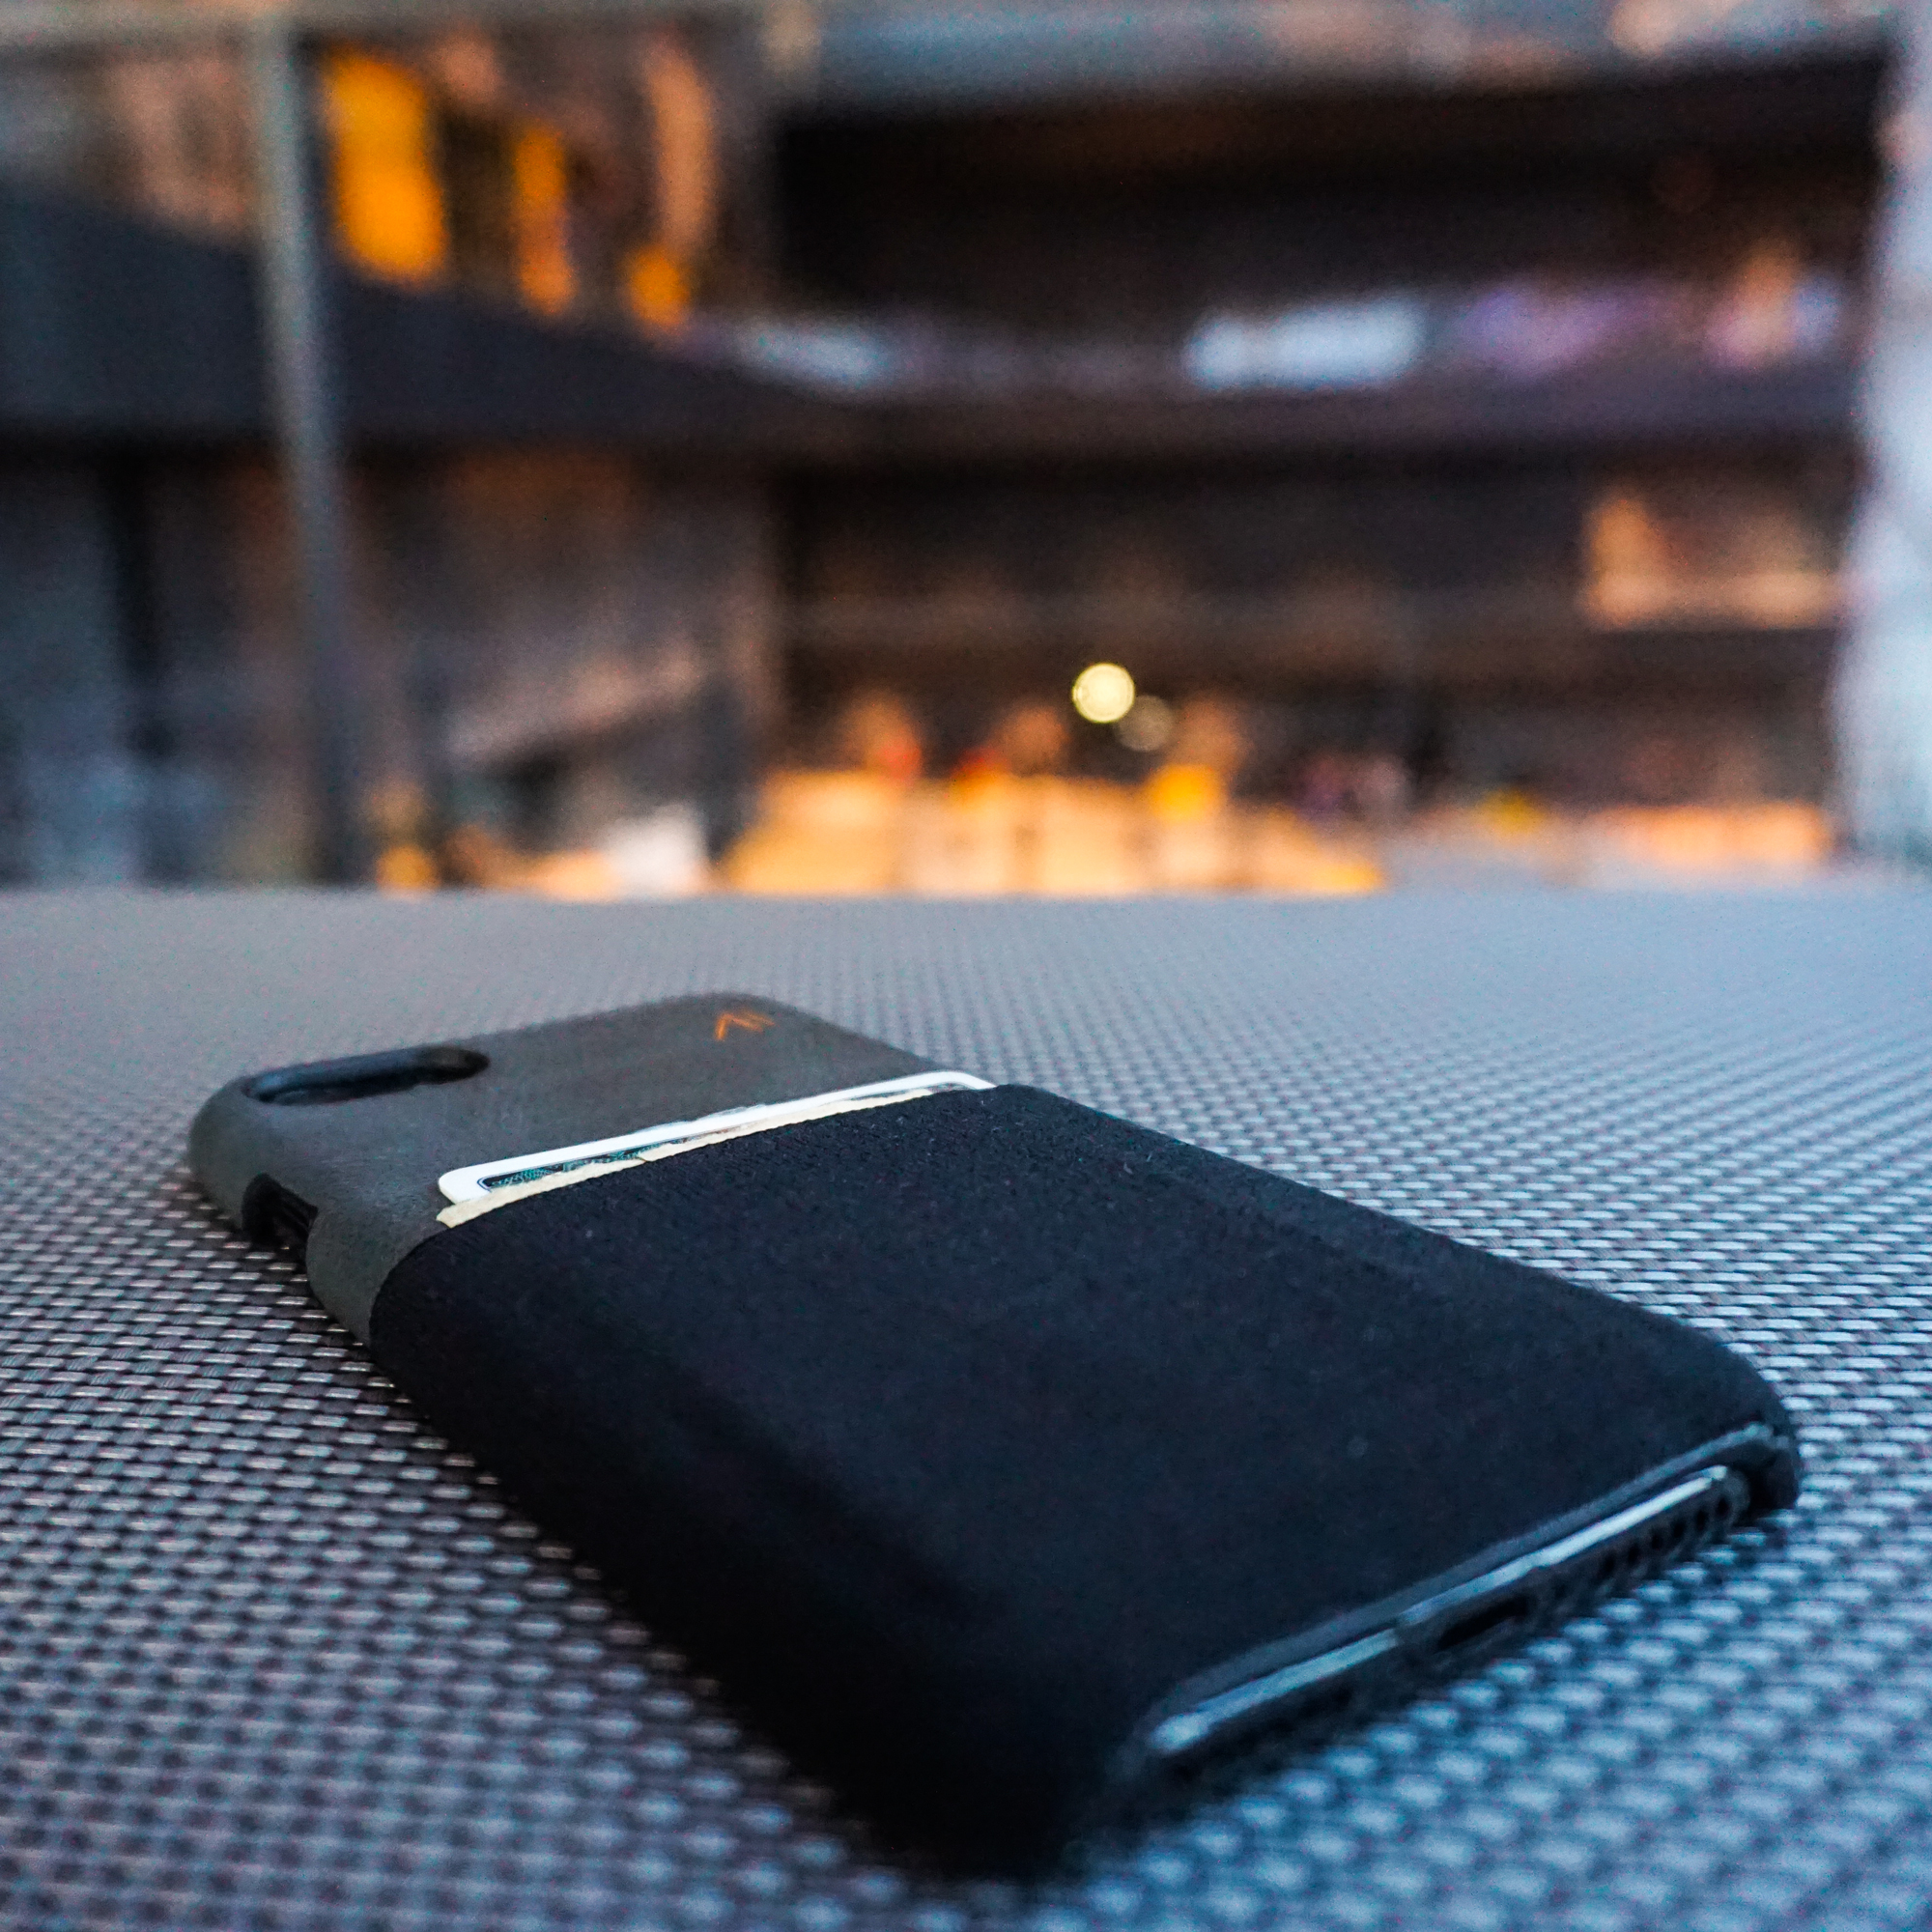 The POCKET CASE is the essential case to protect your iPhone in a fashionable and functional way